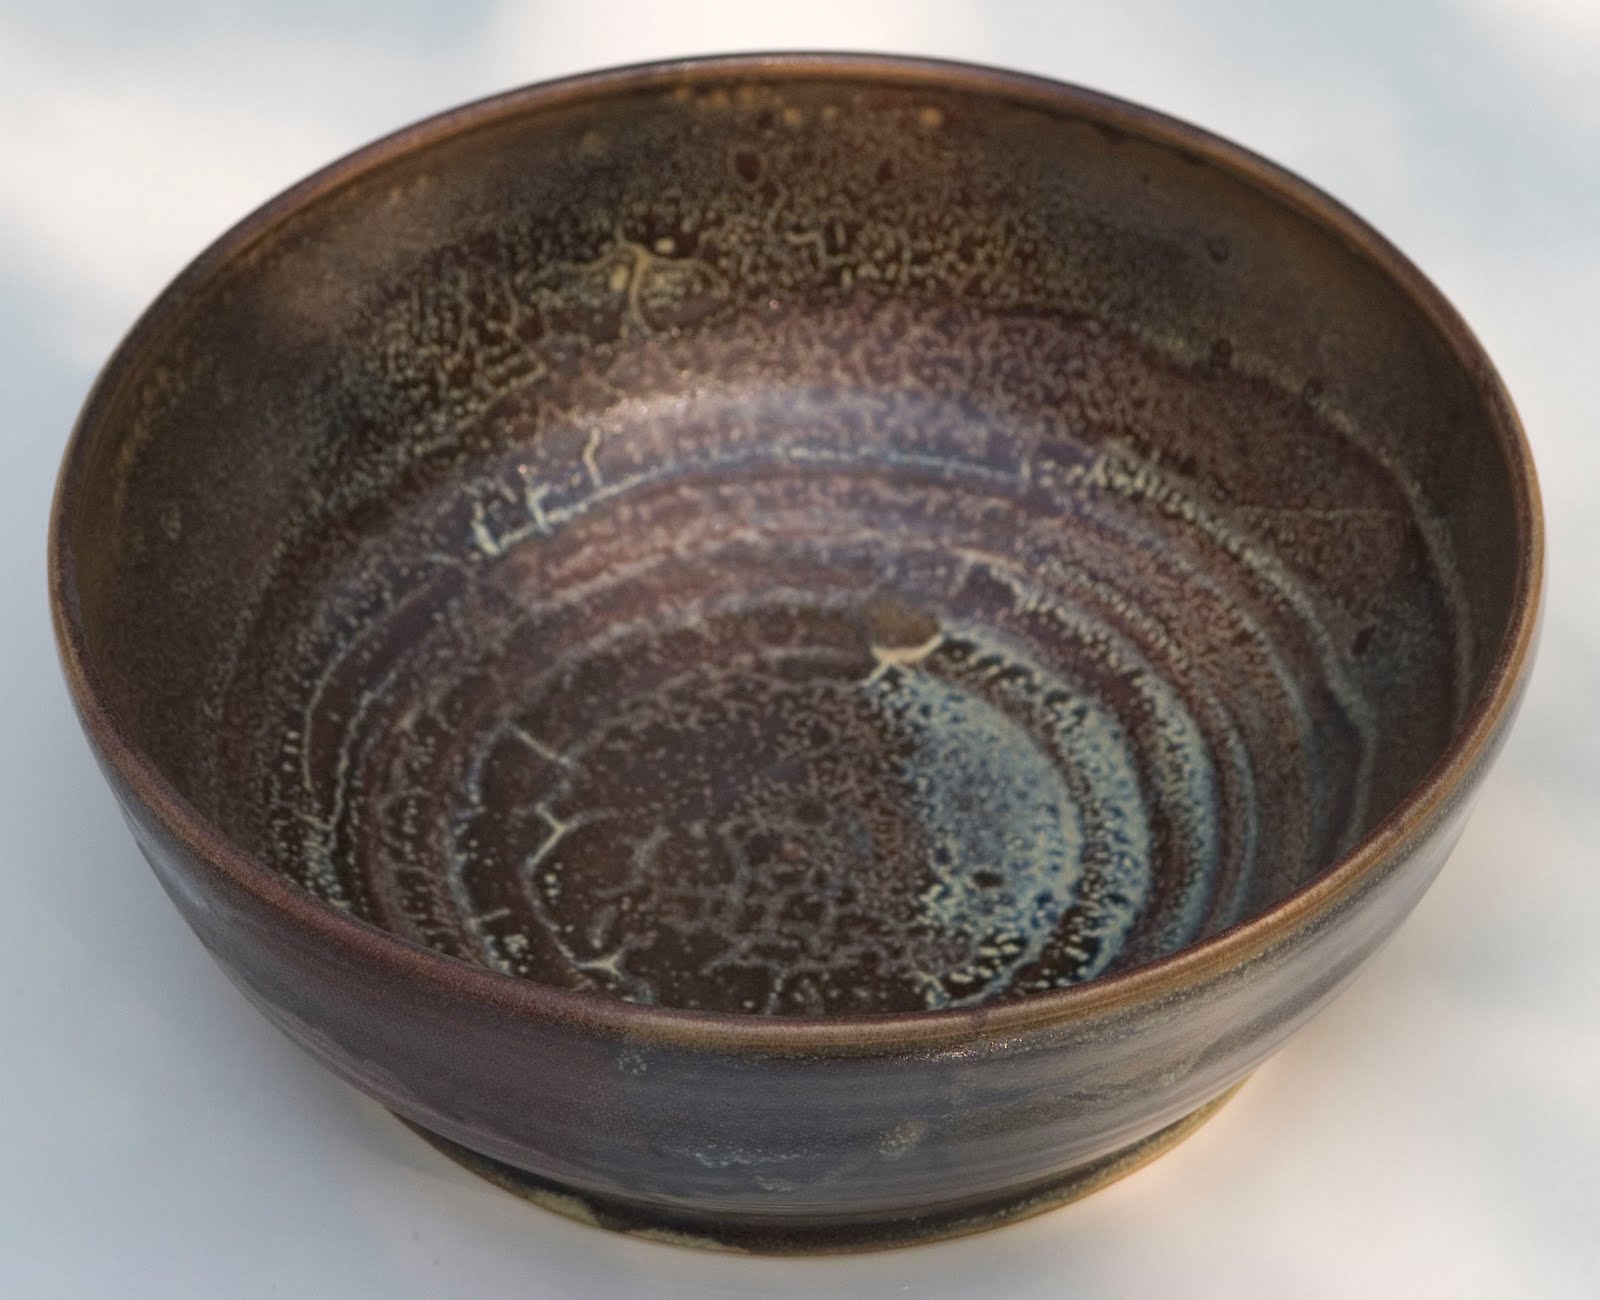 North Star Pottery Rustic Bowls